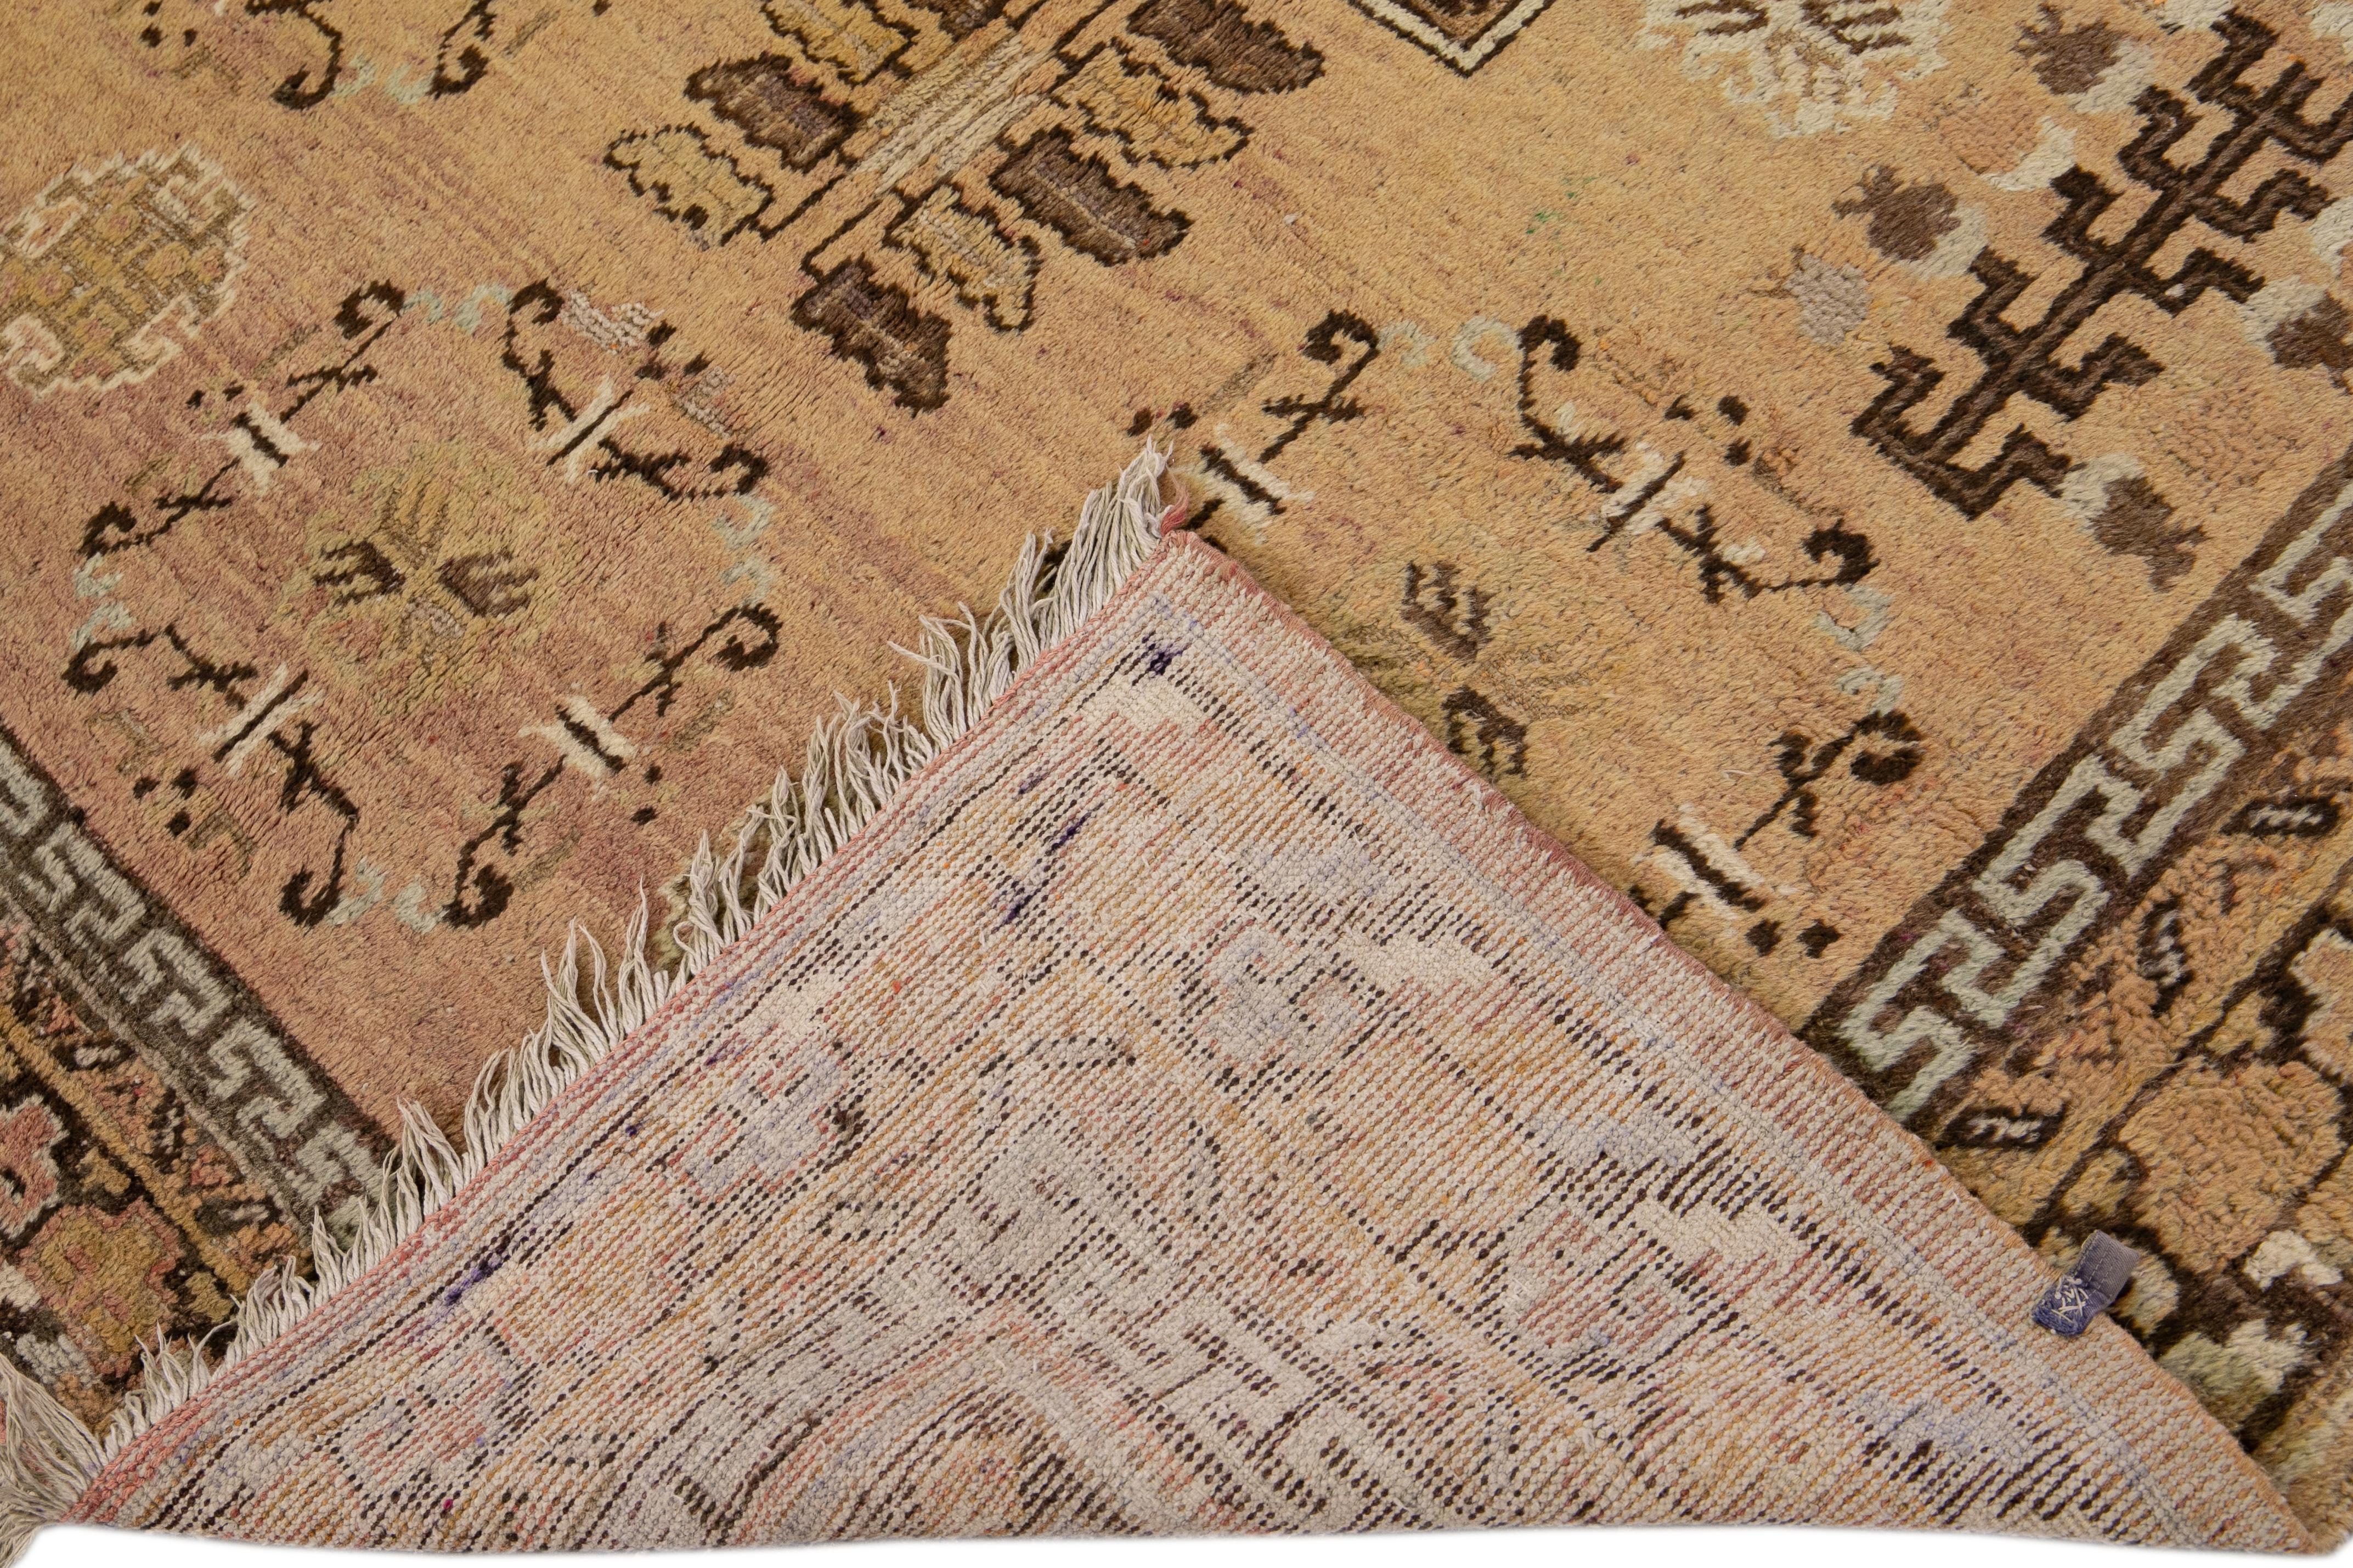 Beautiful antique Khotan hand-knotted wool rug with a Tan field. This Khotan rug has blue, green, and brown accents in all-over geometric design. 

This rug measures 5'10